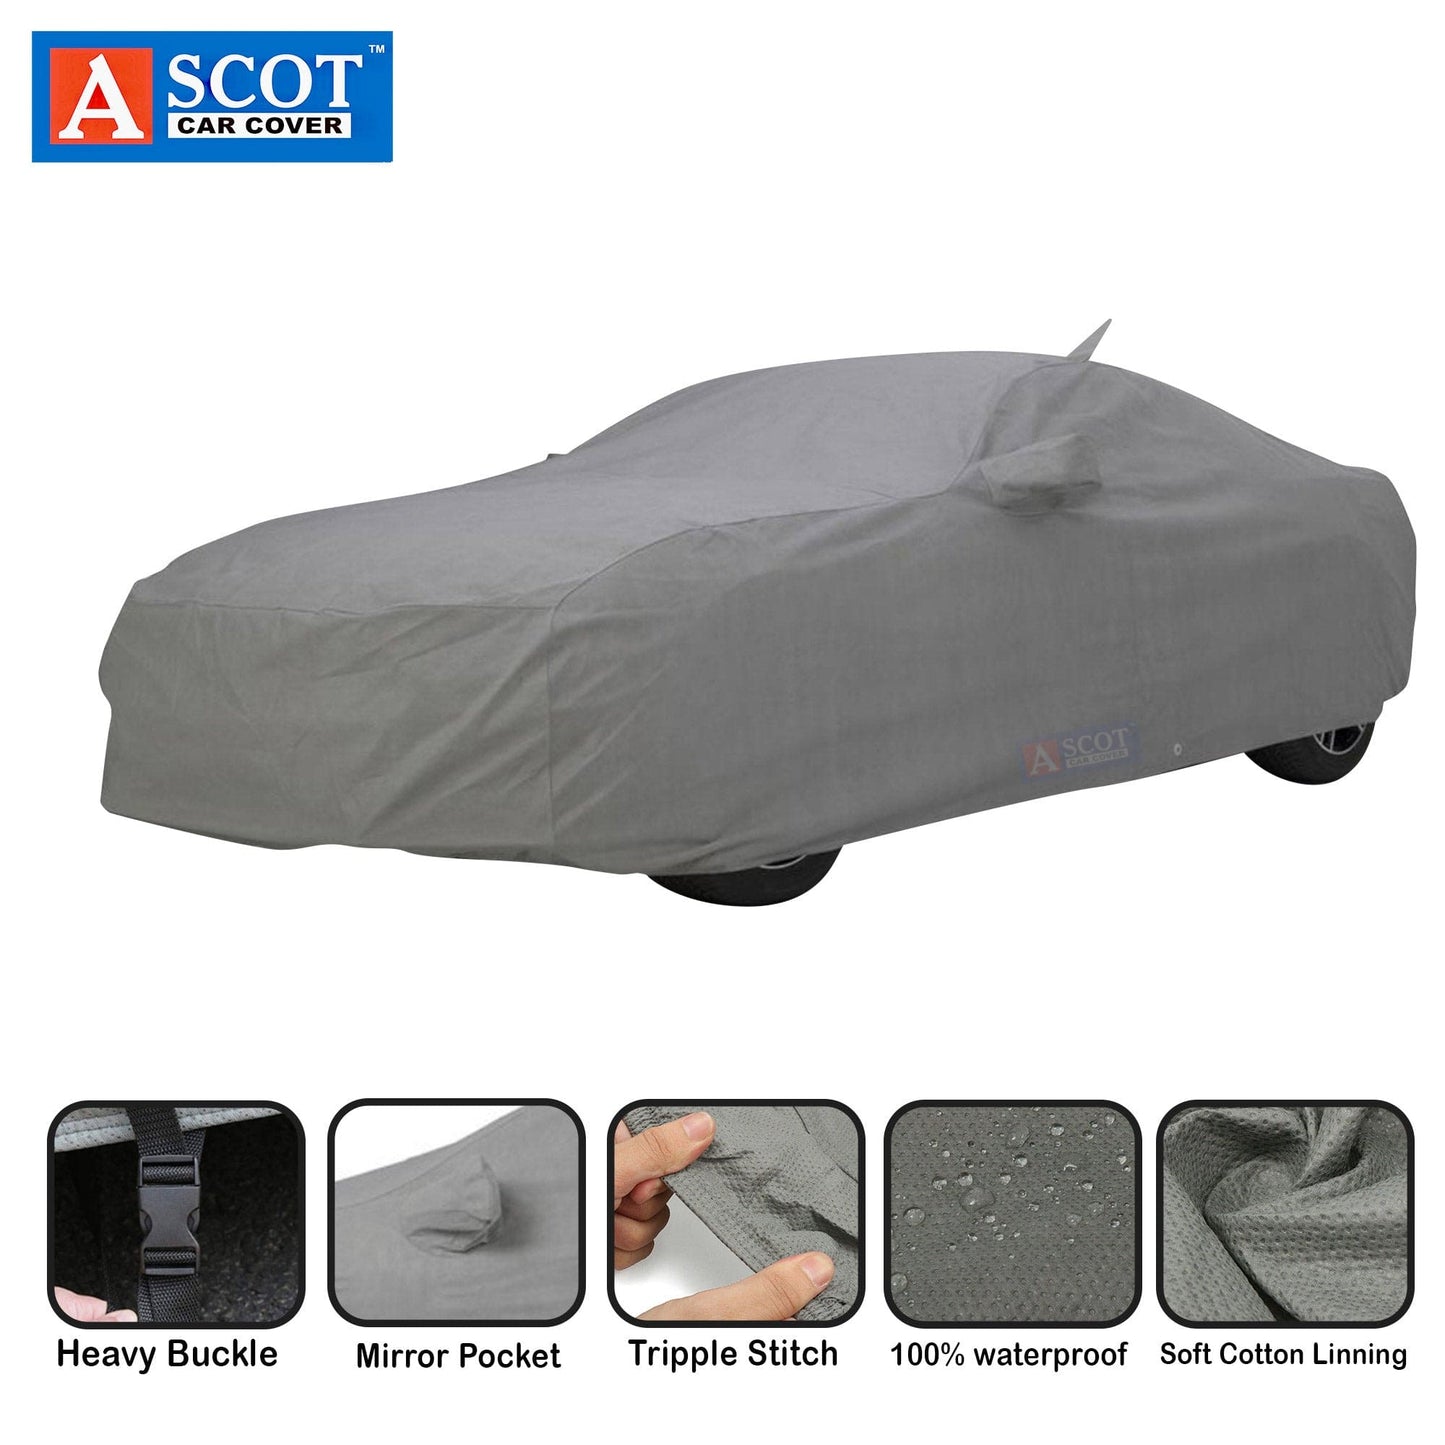 Ascot BMW M5 Car Cover Waterproof 2011-2016 Model 3 Layers Custom-Fit All Weather Heat Resistant UV Proof